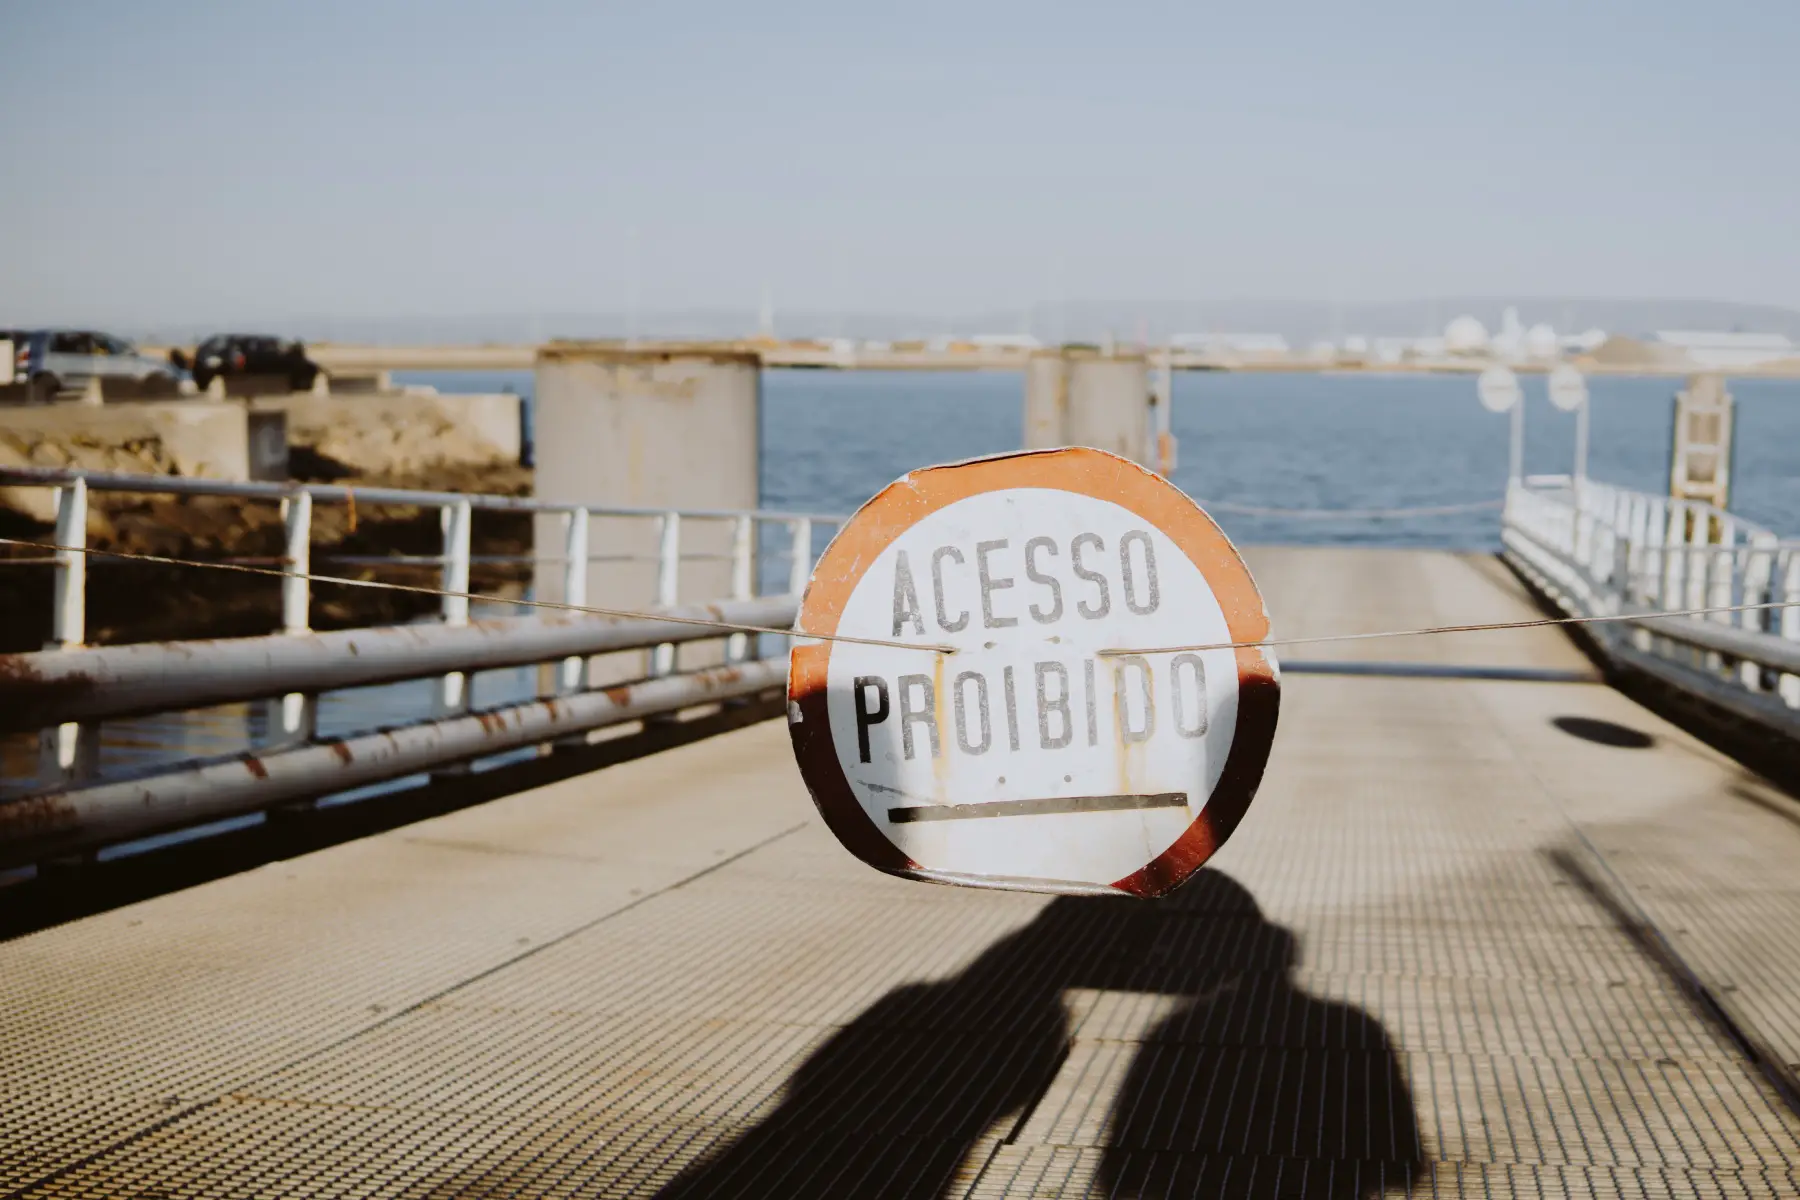 A faded Portuguese sign on a pier in Aveiro, Portugal that says 'Acesso Proibioo' (prohibited access)